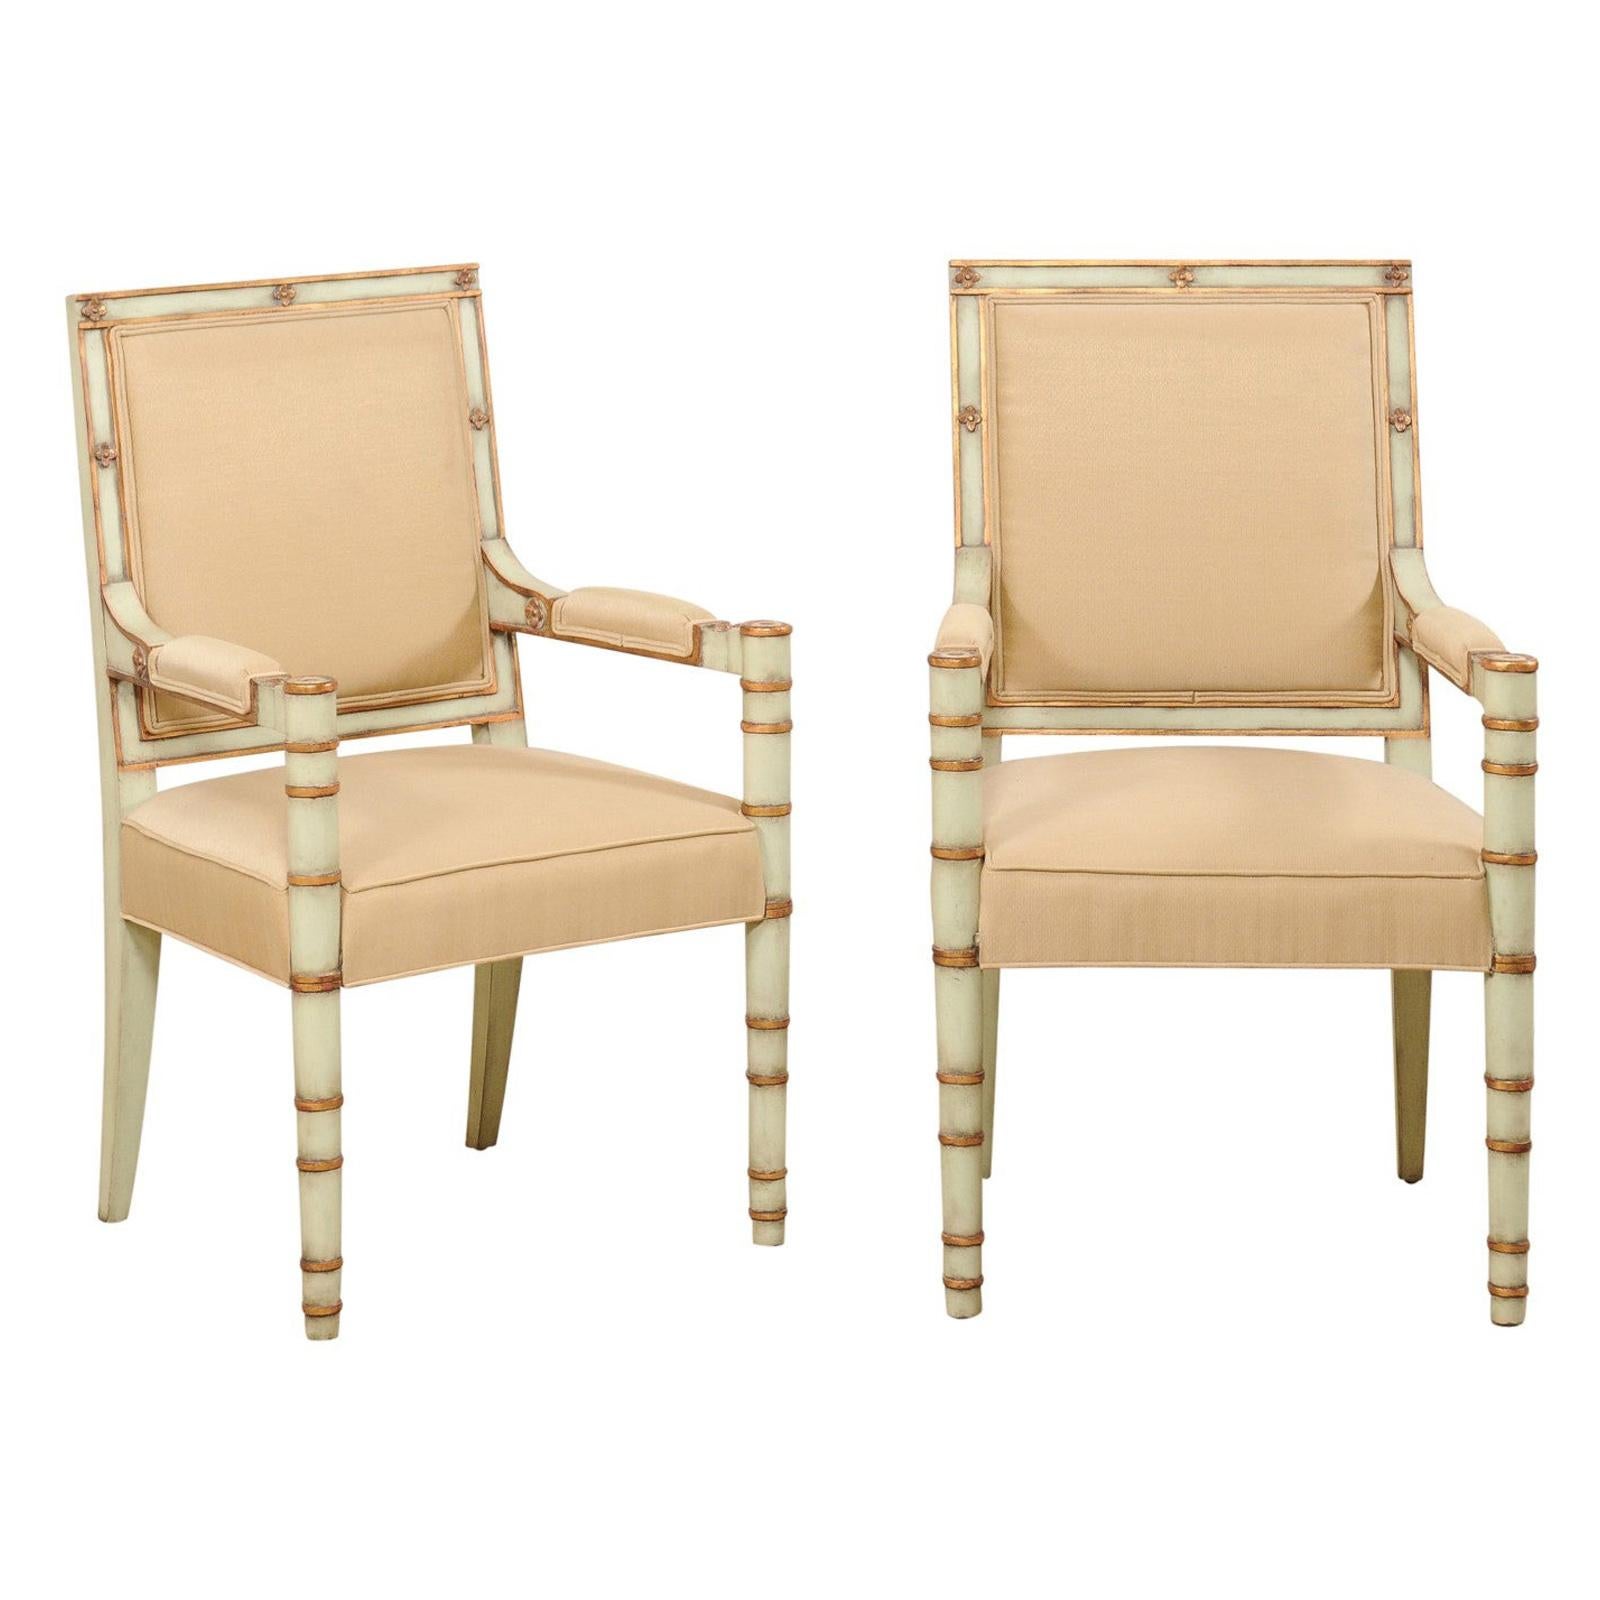 French Pair of Vintage Accent Chairs with Neoclassical Design Influences